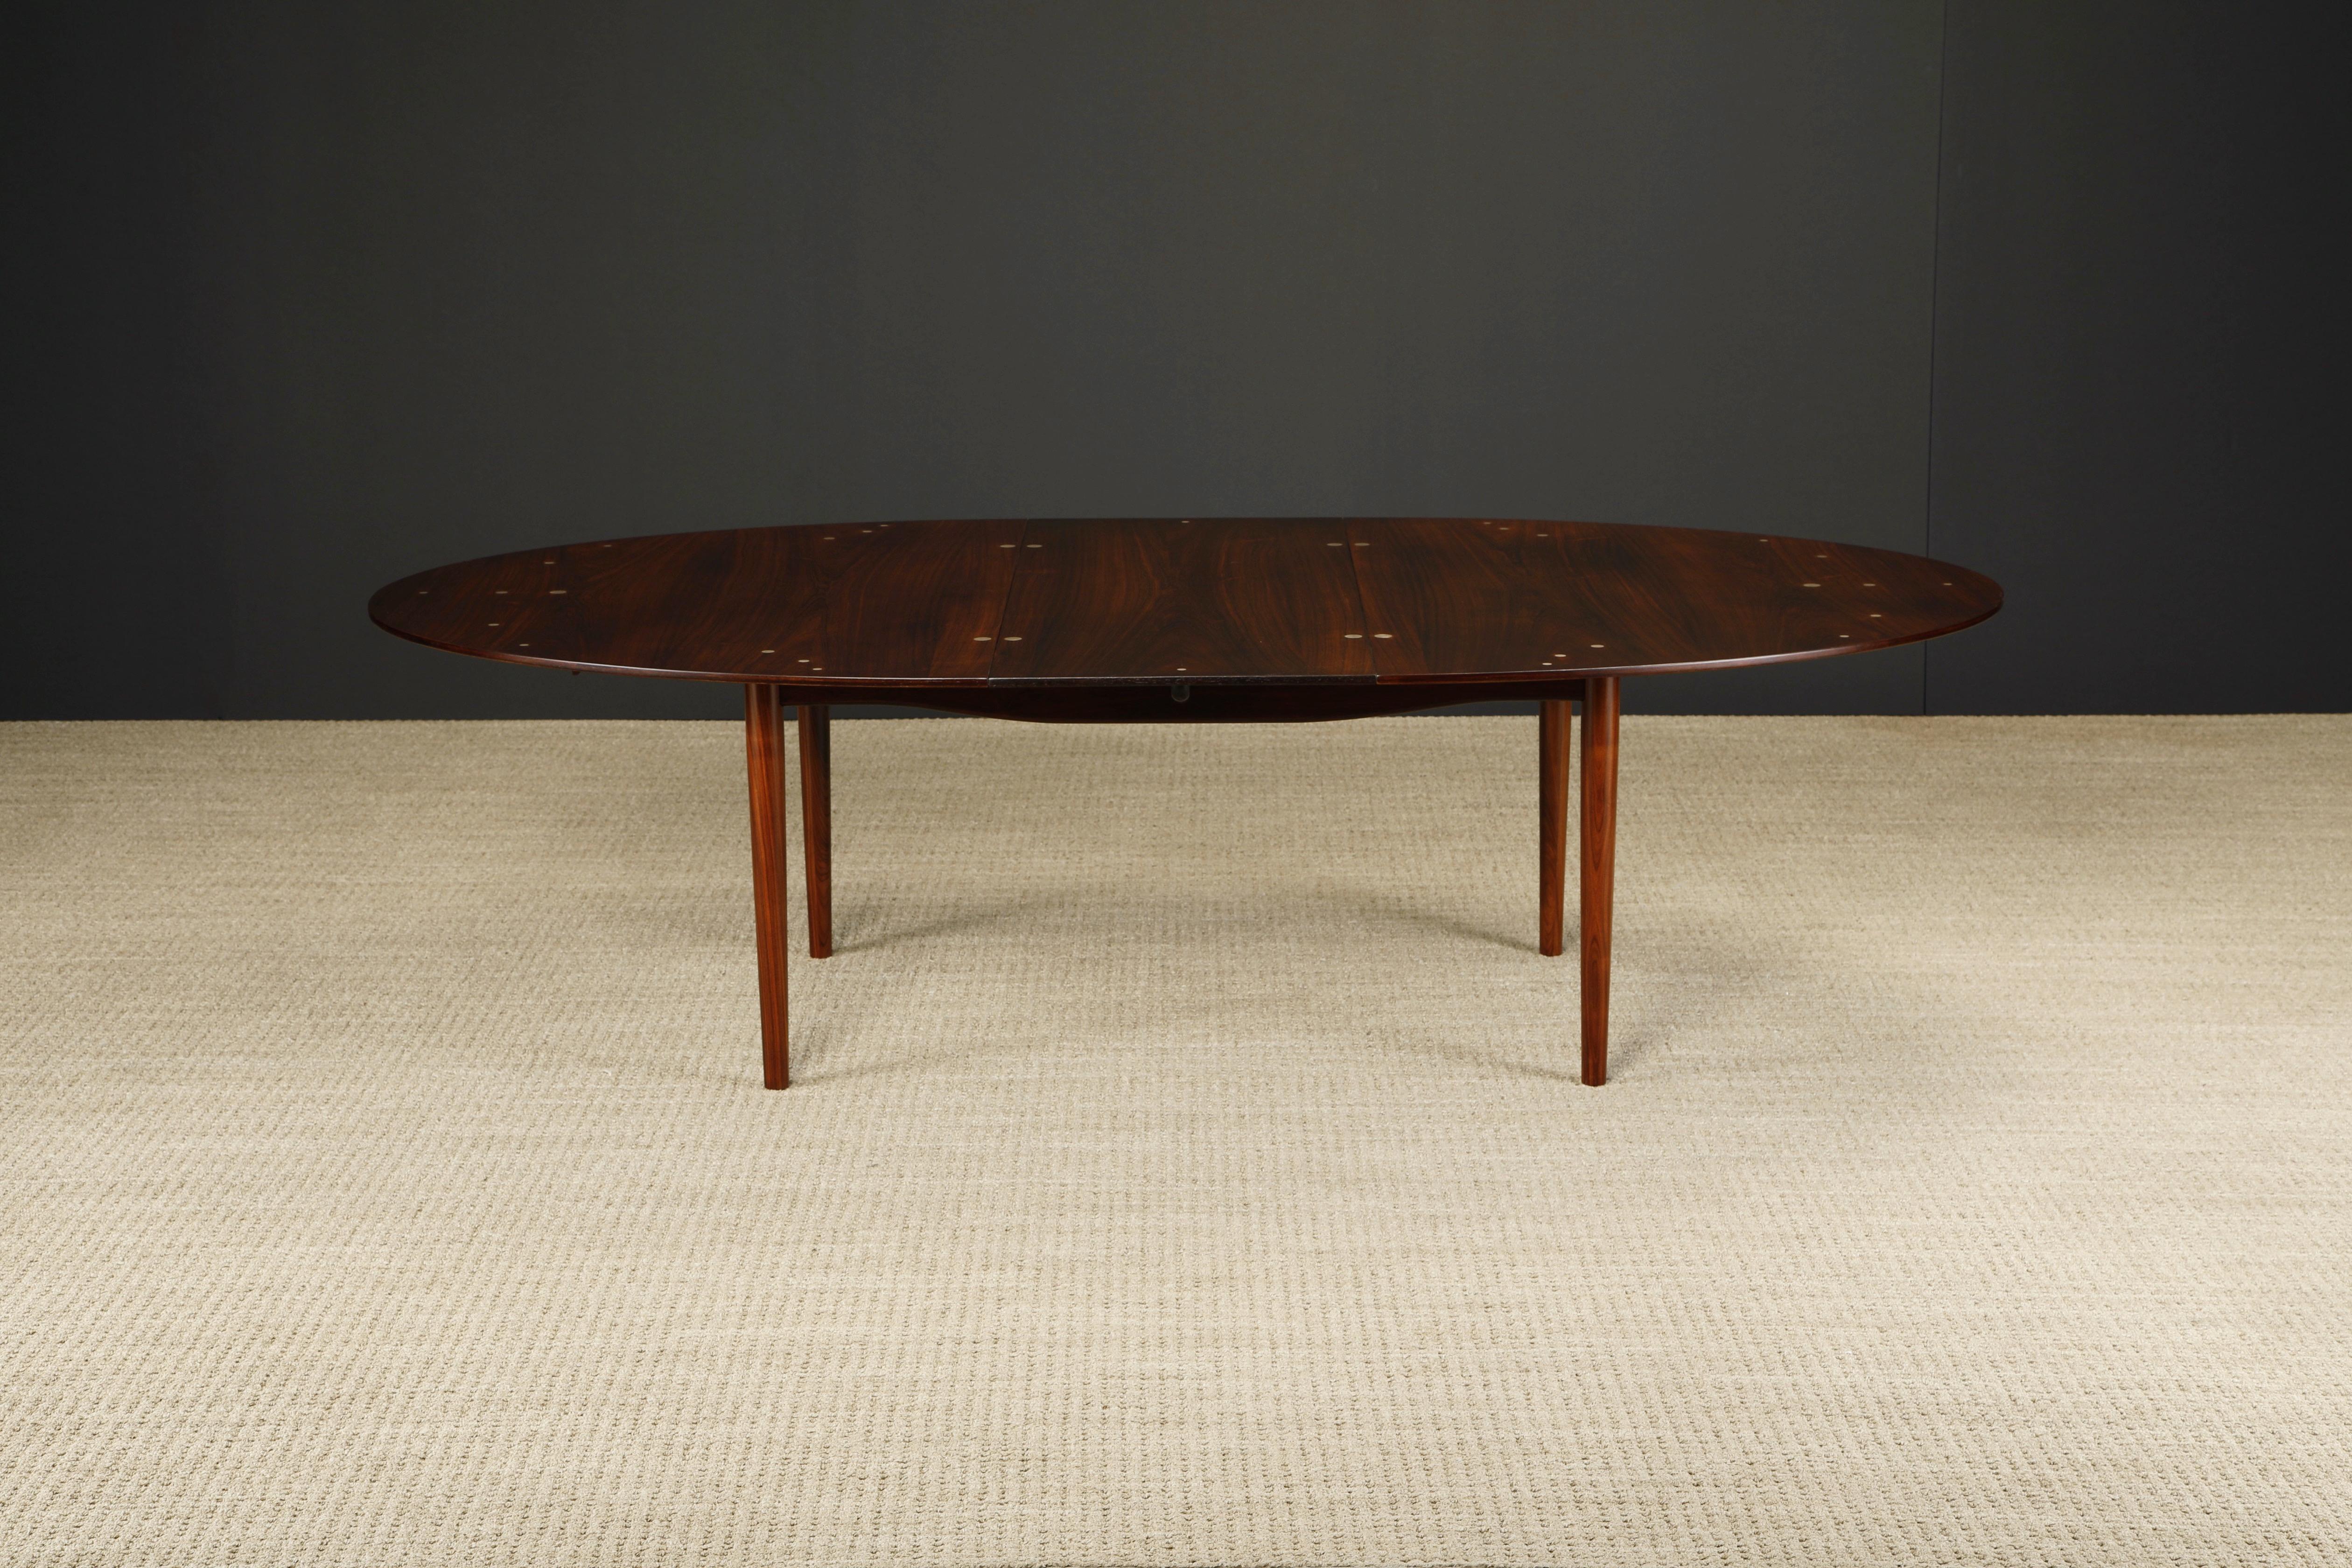 Exceptionally rare and sought after, this Finn Juhl for Niels Vodder 'Judas' dining table, 1950s Denmark, was professionally restored and features gorgeous Brazilian Rosewood with sterling silver inlaid medallions which assist in tableware placement